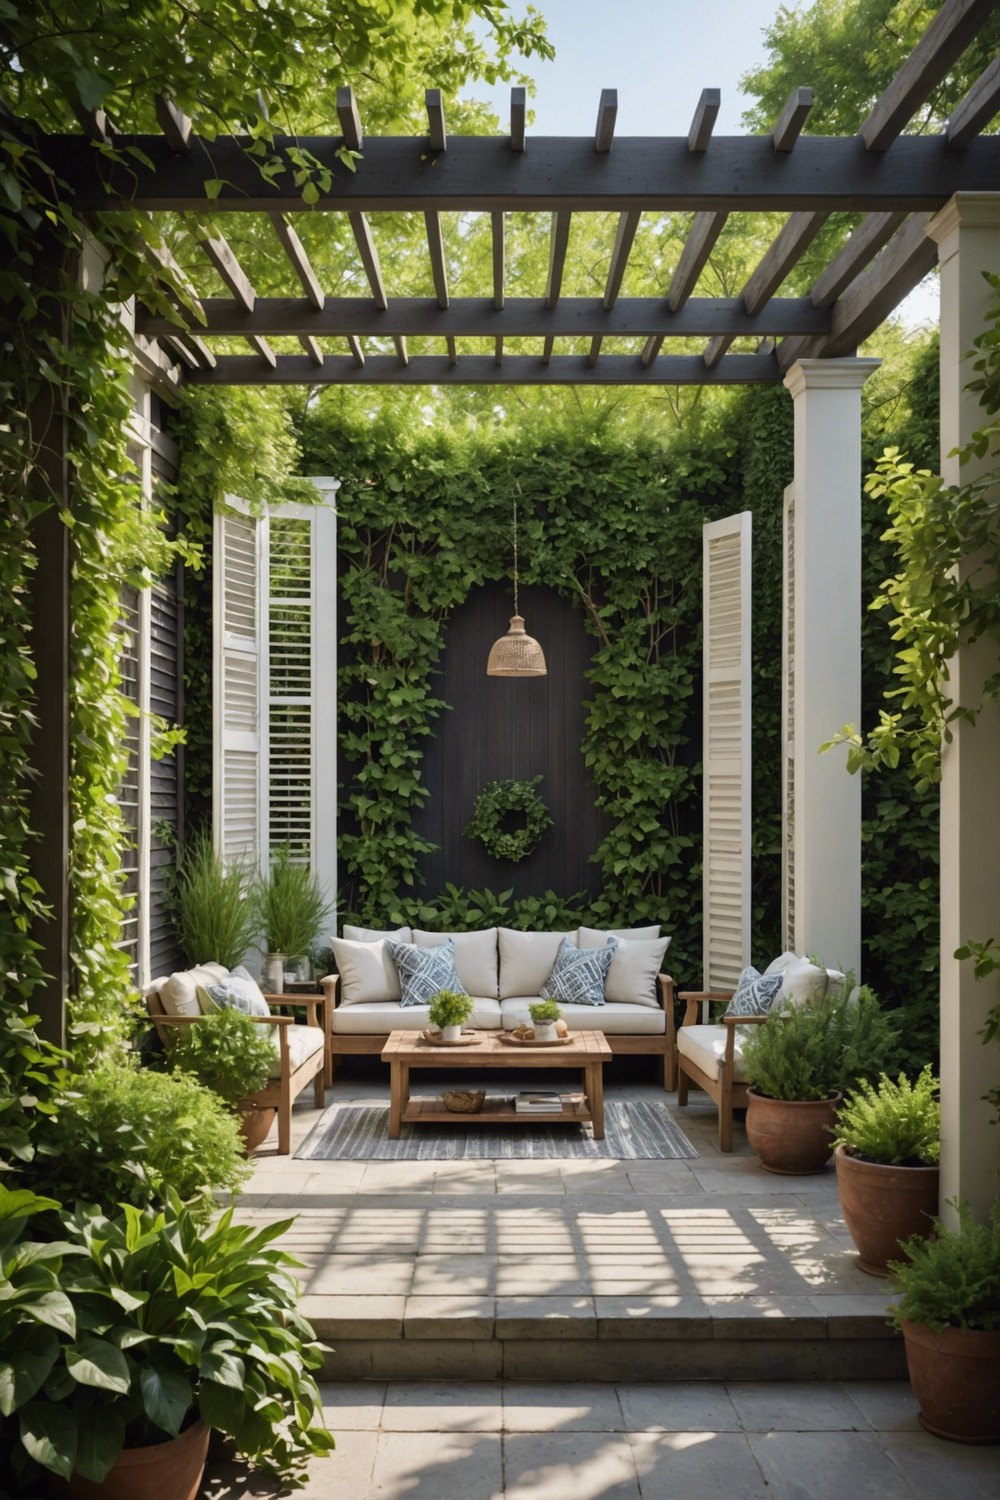 Pergola with Sliding Shutters for Privacy